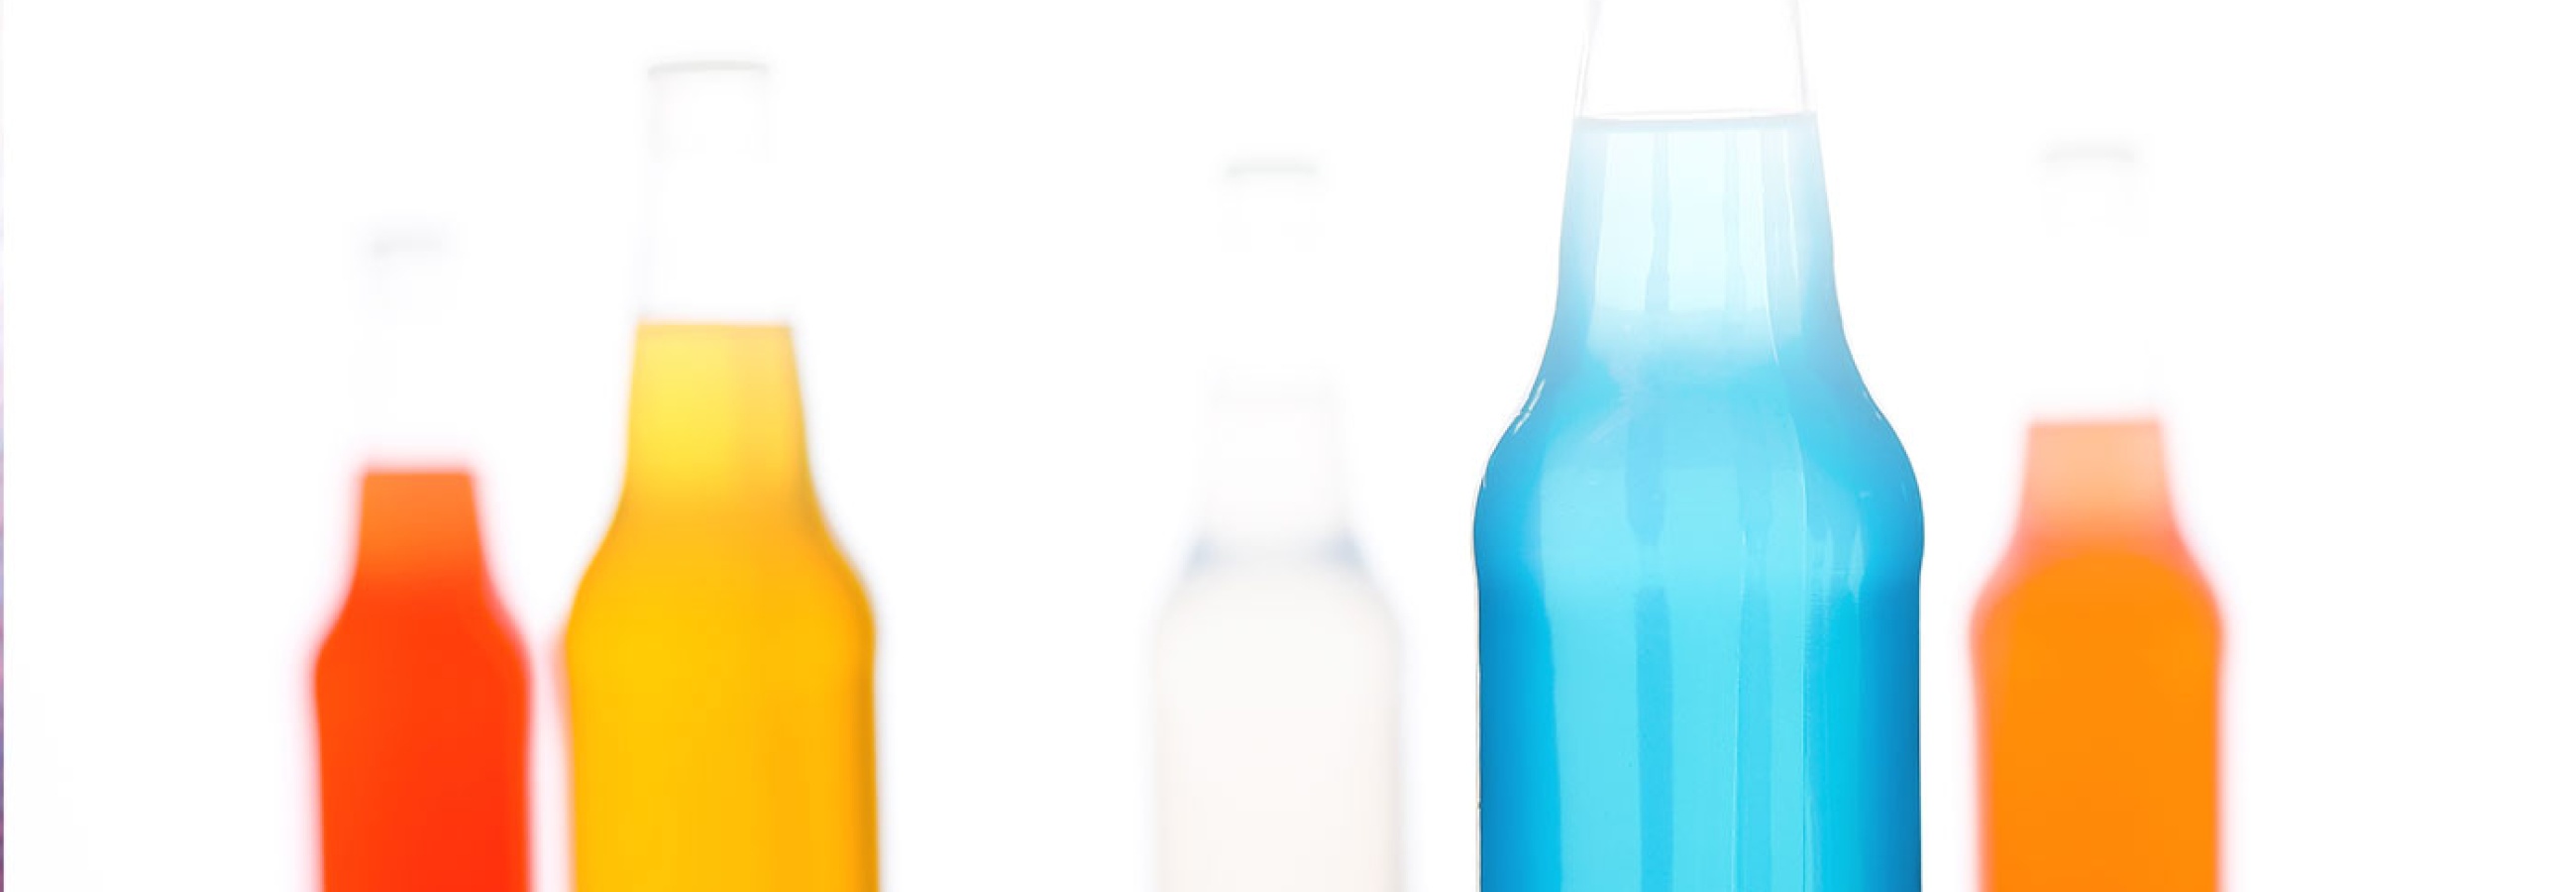 Customizable Services to Support Your Beverage at Every Stage